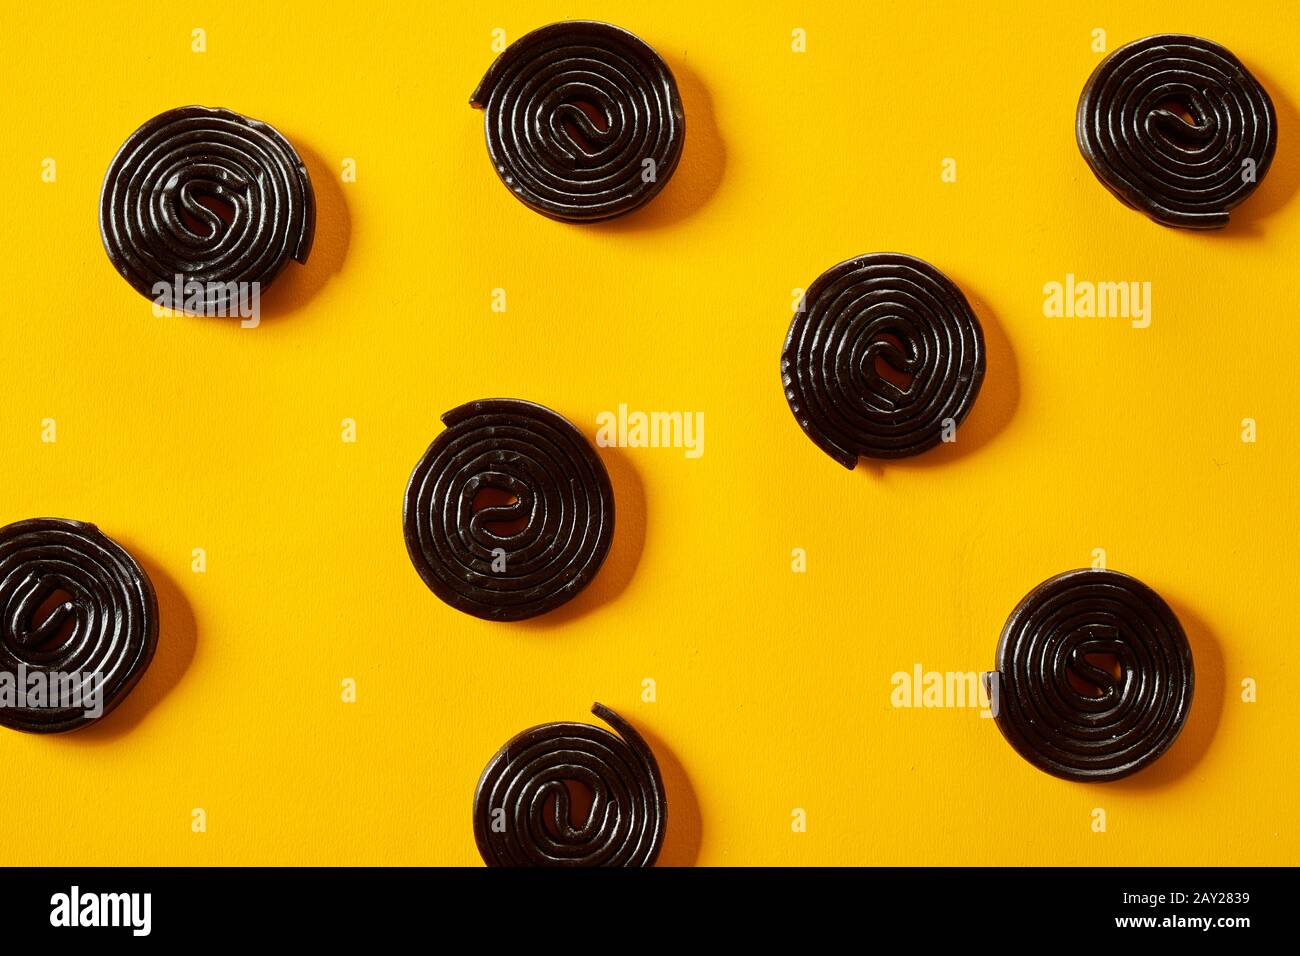 Spiral coils of fresh liquorice candy scattered on a colorful vibrant yellow background in a full frame view Stock Photo